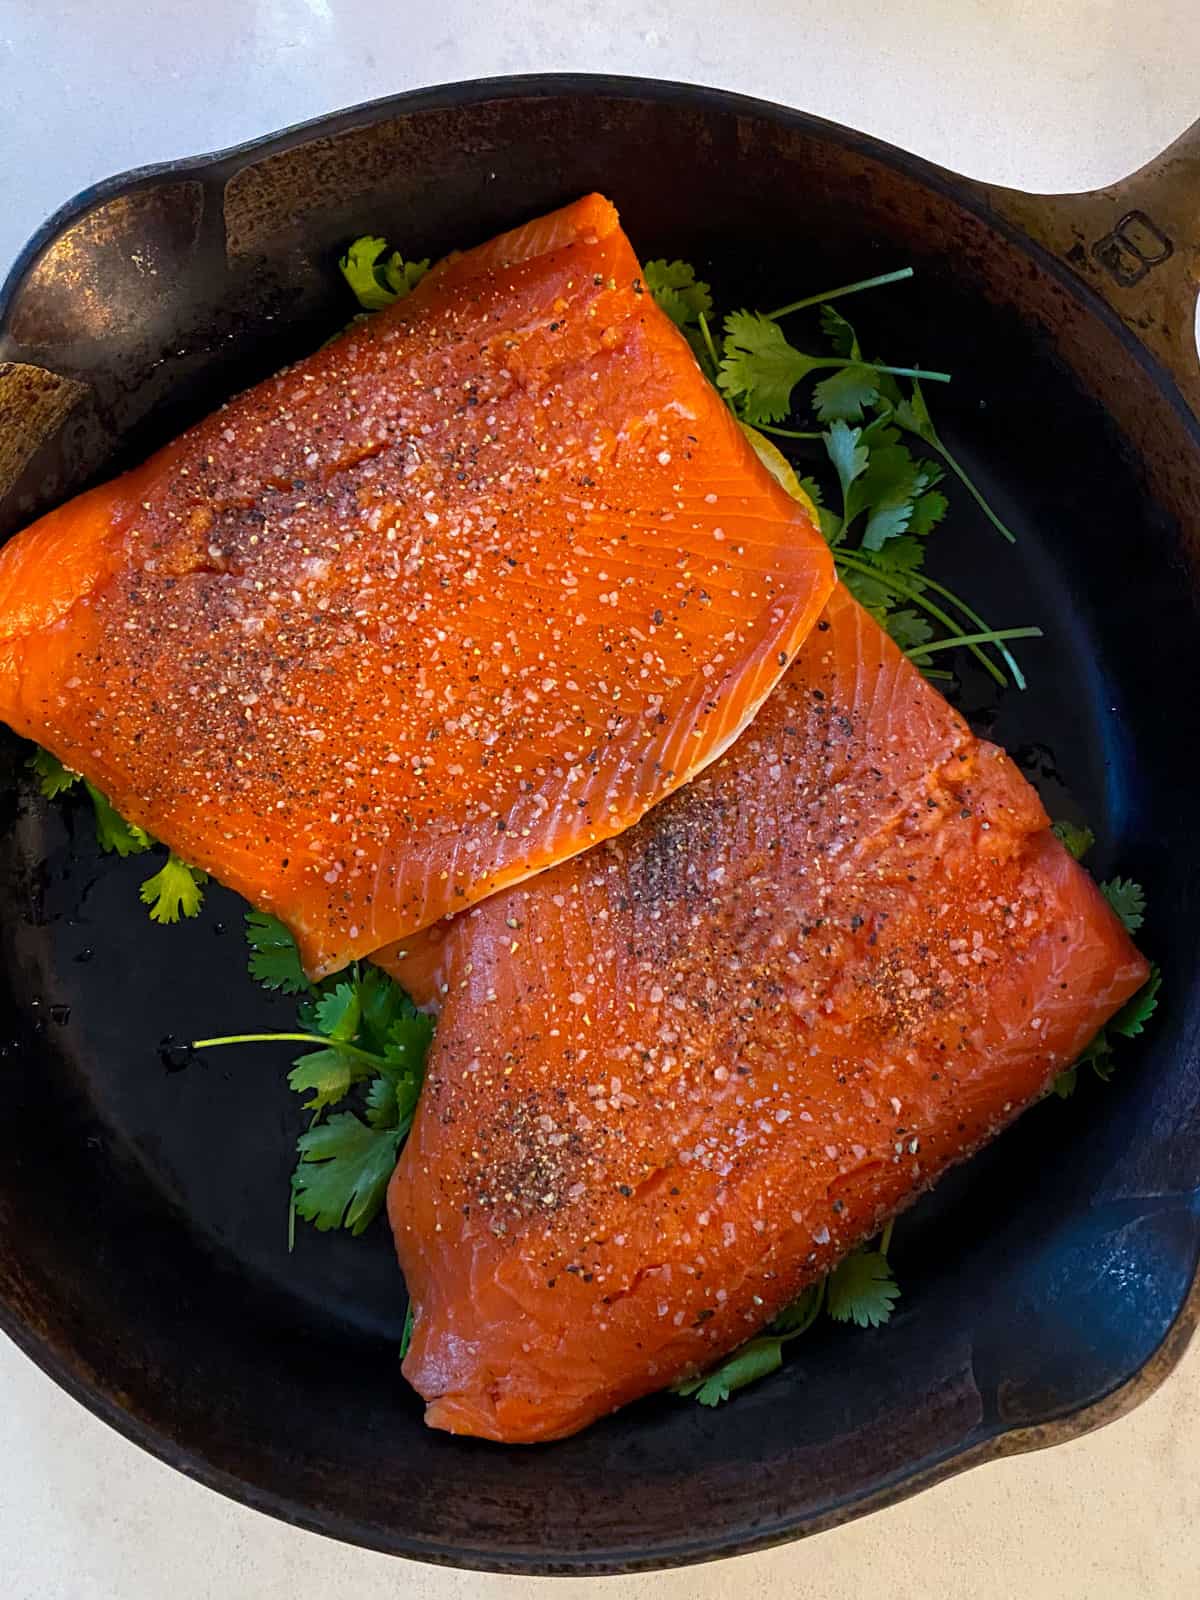 Place the salmon filets on top of the fresh herbs ands season with salt and pepper.